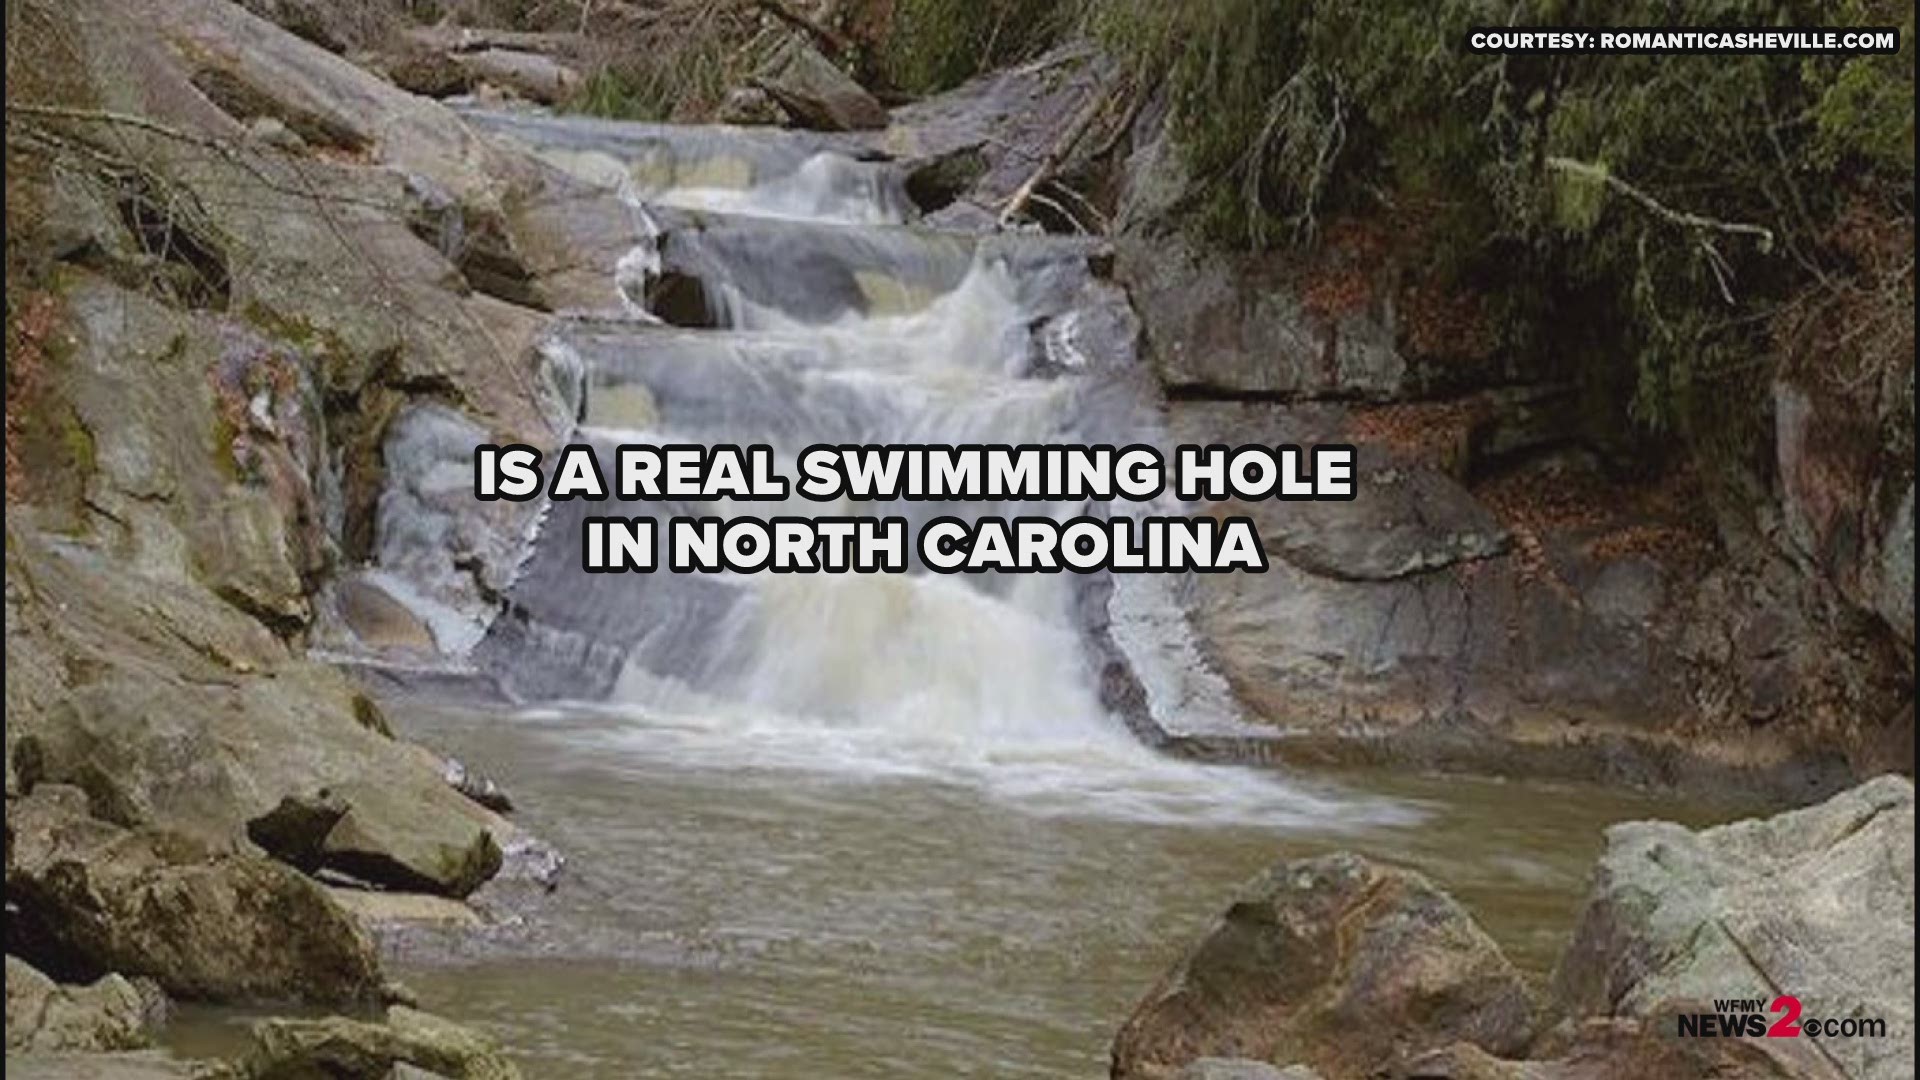 There’s a good chance you’ll bust your butt at “Bust Your Butt Falls” in North Carolina. But don’t get butt hurt because we’ve warned you! The swimming hole and natural slide are on the Cullasaja River along US Highway 64 near Highland.